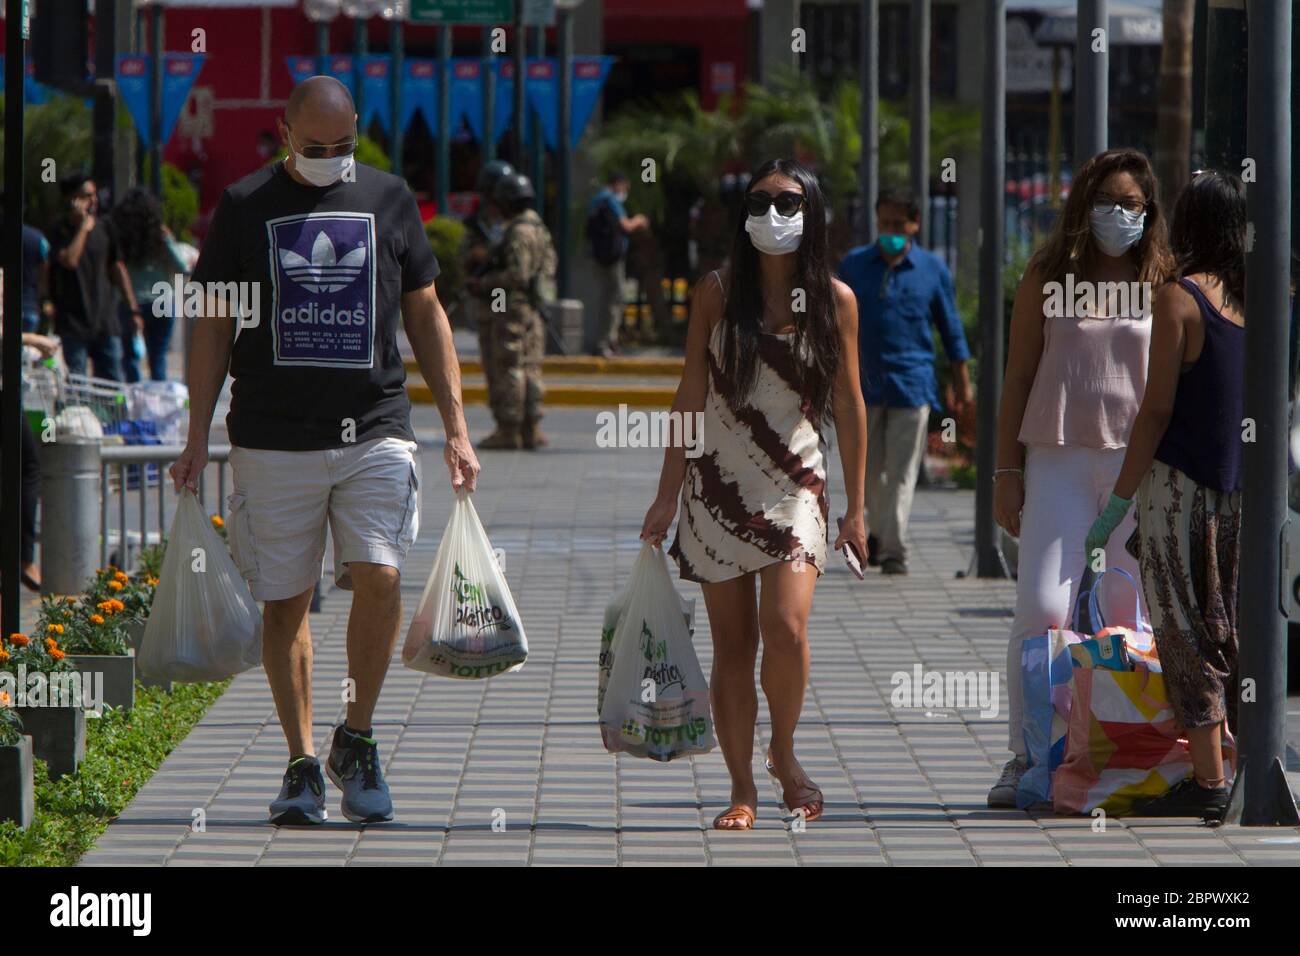 A group of people wearing masks carry groceries from the supermarket during the national mandatory quarantine as a response to the COVID-19 pandemic in Lima, Peru. Since the installment of the measure back in March the government have struggled to stop the spread of the virus especially in public areas such as markets. 33,931 people have been infected and 943 have died as of April 29, 2020. Stock Photo